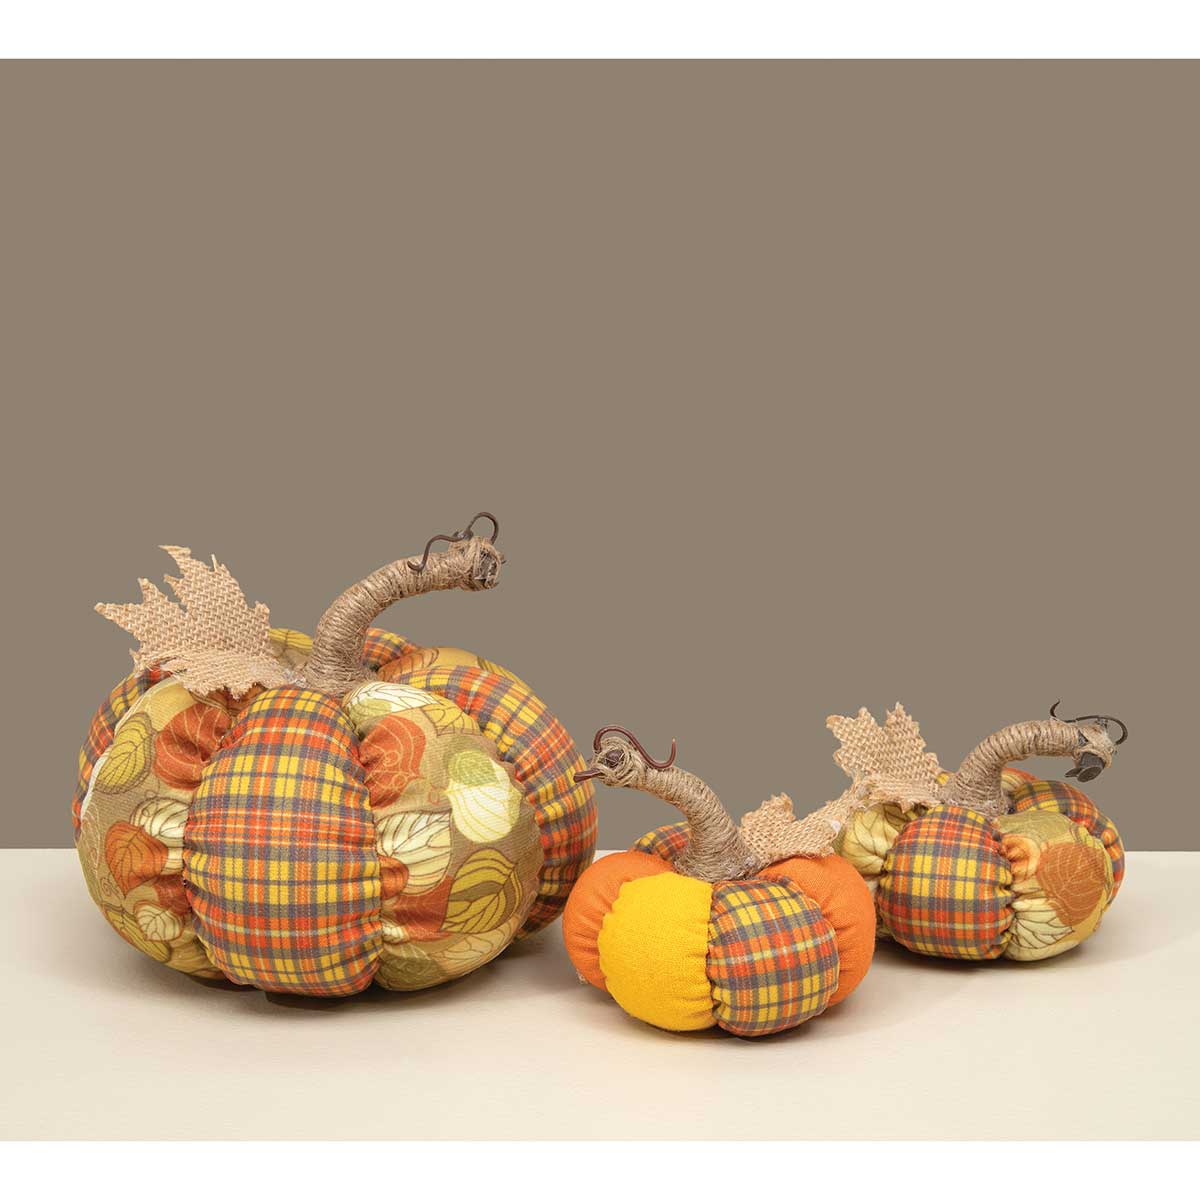 PLUSH PUMPKIN 2 ASSORTED SMALL 4IN X 3.5IN WITH 1IN STEM